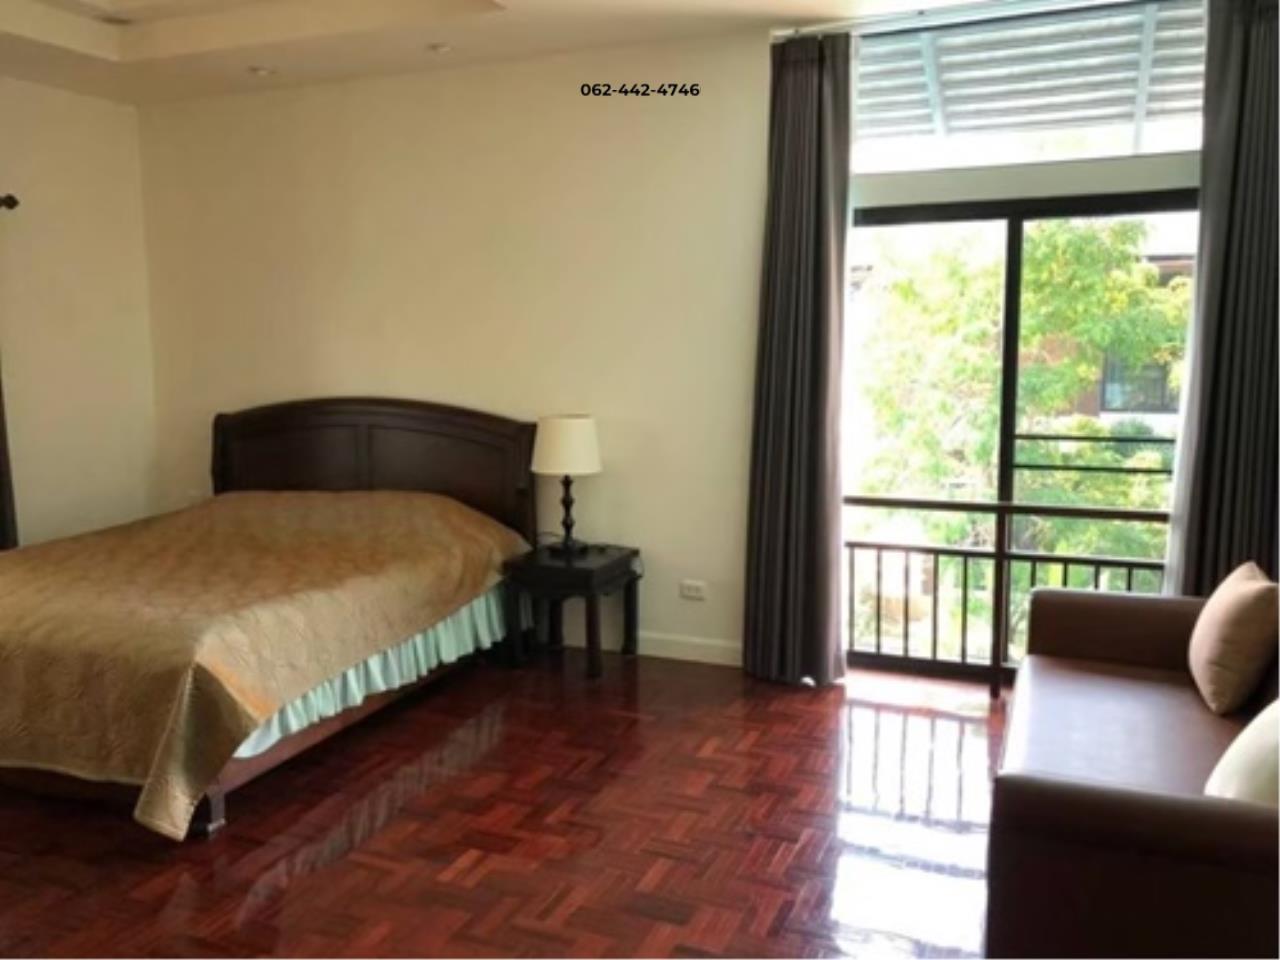 Jangproperty Agency's PUH_00161 House for sale Lanna Montra Hang Dong Chiang Mai  6